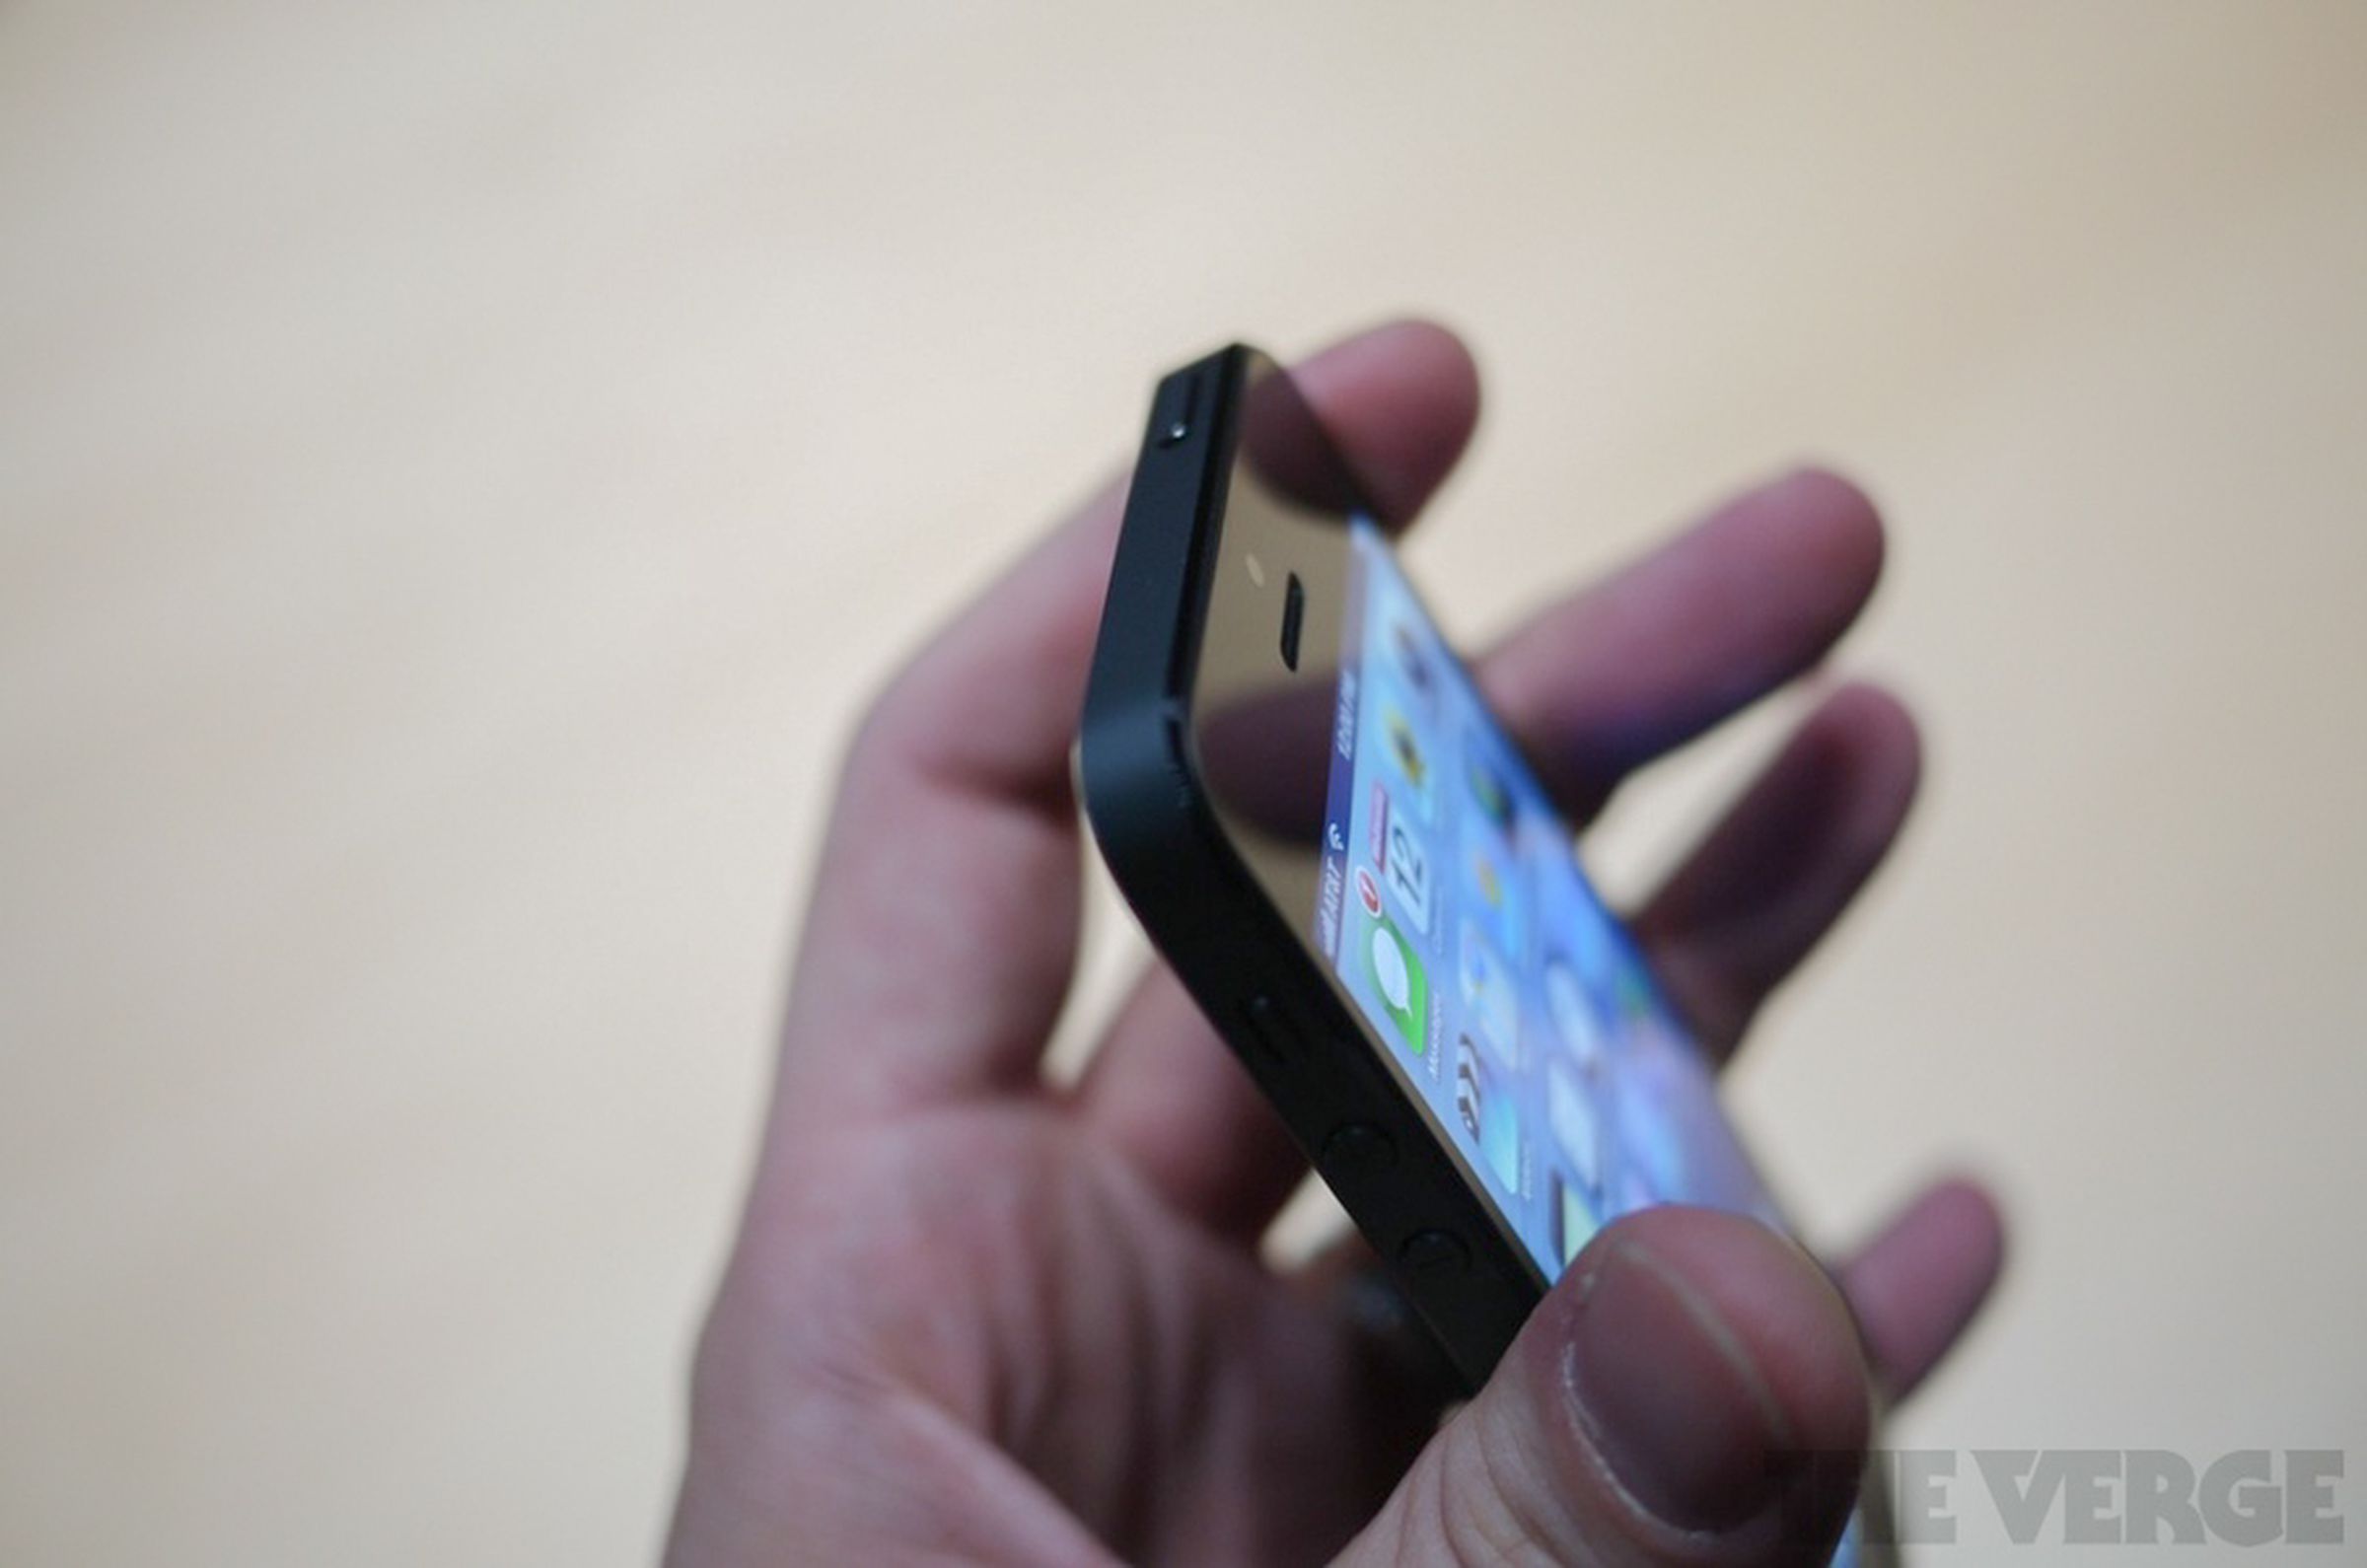 iPhone 5 hands-on photos